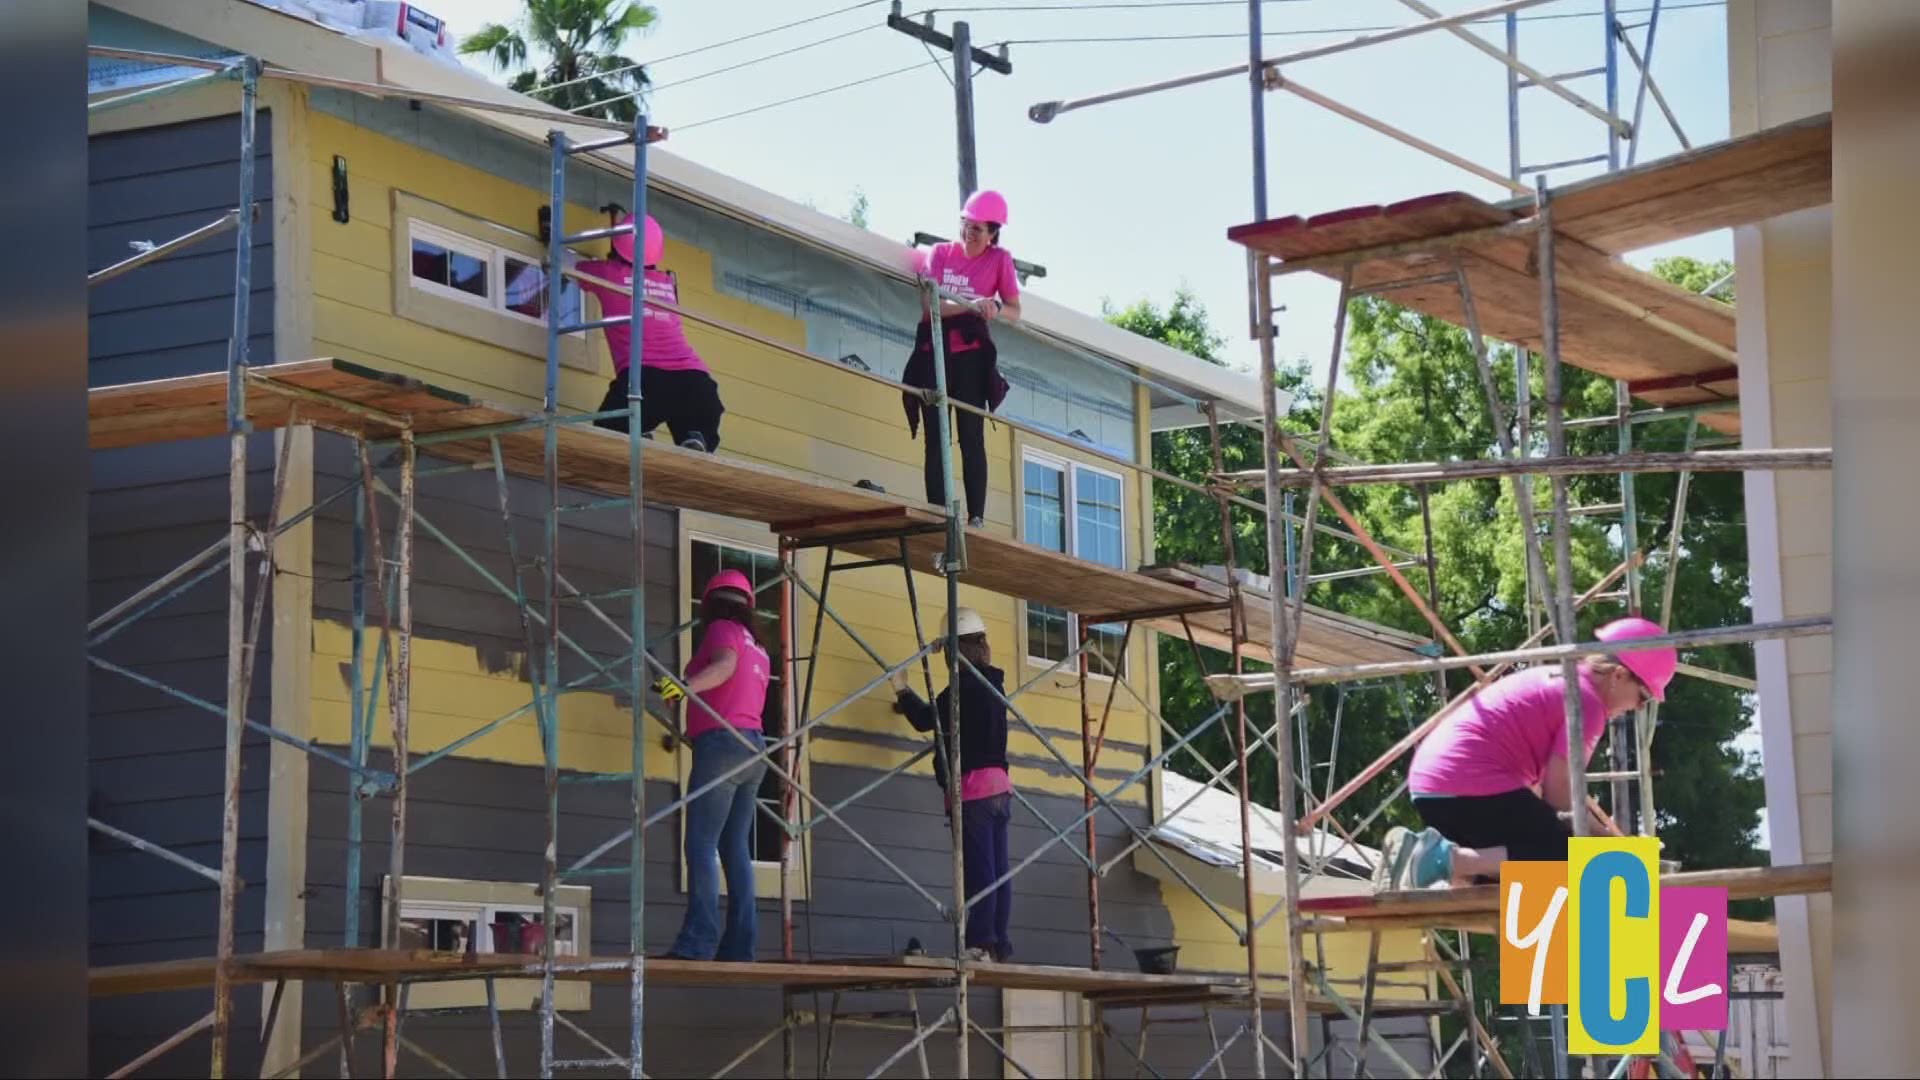 Celebrate Women in Construction Week during Women’s Month and join the upcoming Habitat Women Build event in May!